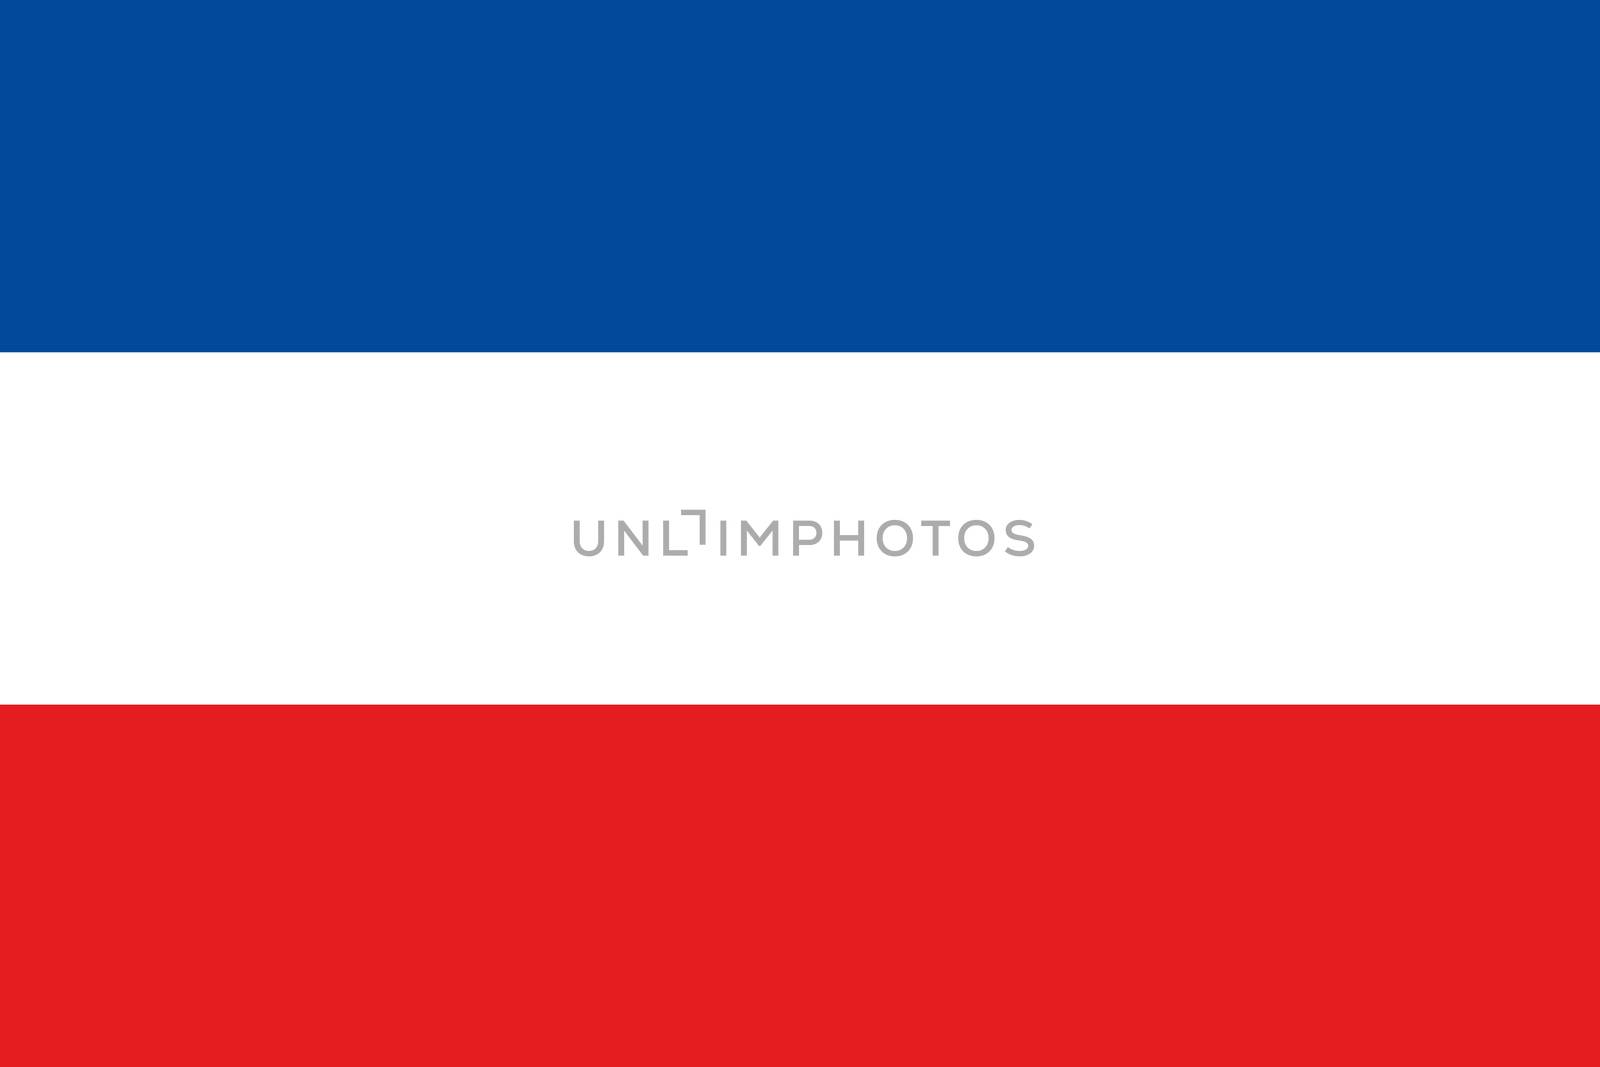 An illustration of the flag of Yugoslavia